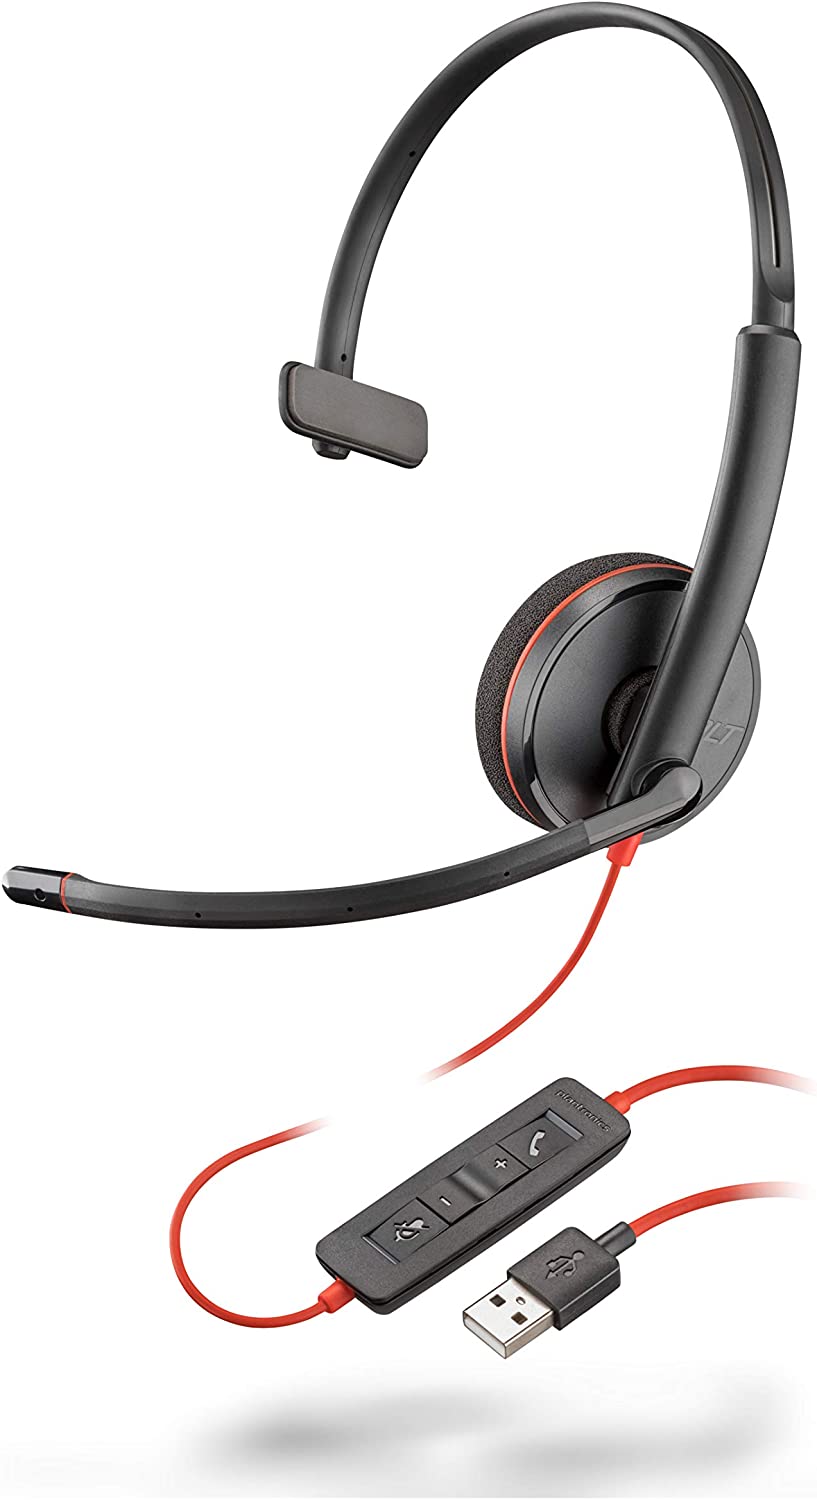 Poly Plantronics - Blackwire 3210 - Wired, Single Ear (Monaural) Headset with Boom Mic - USB-A to connect to your PC and/or Mac